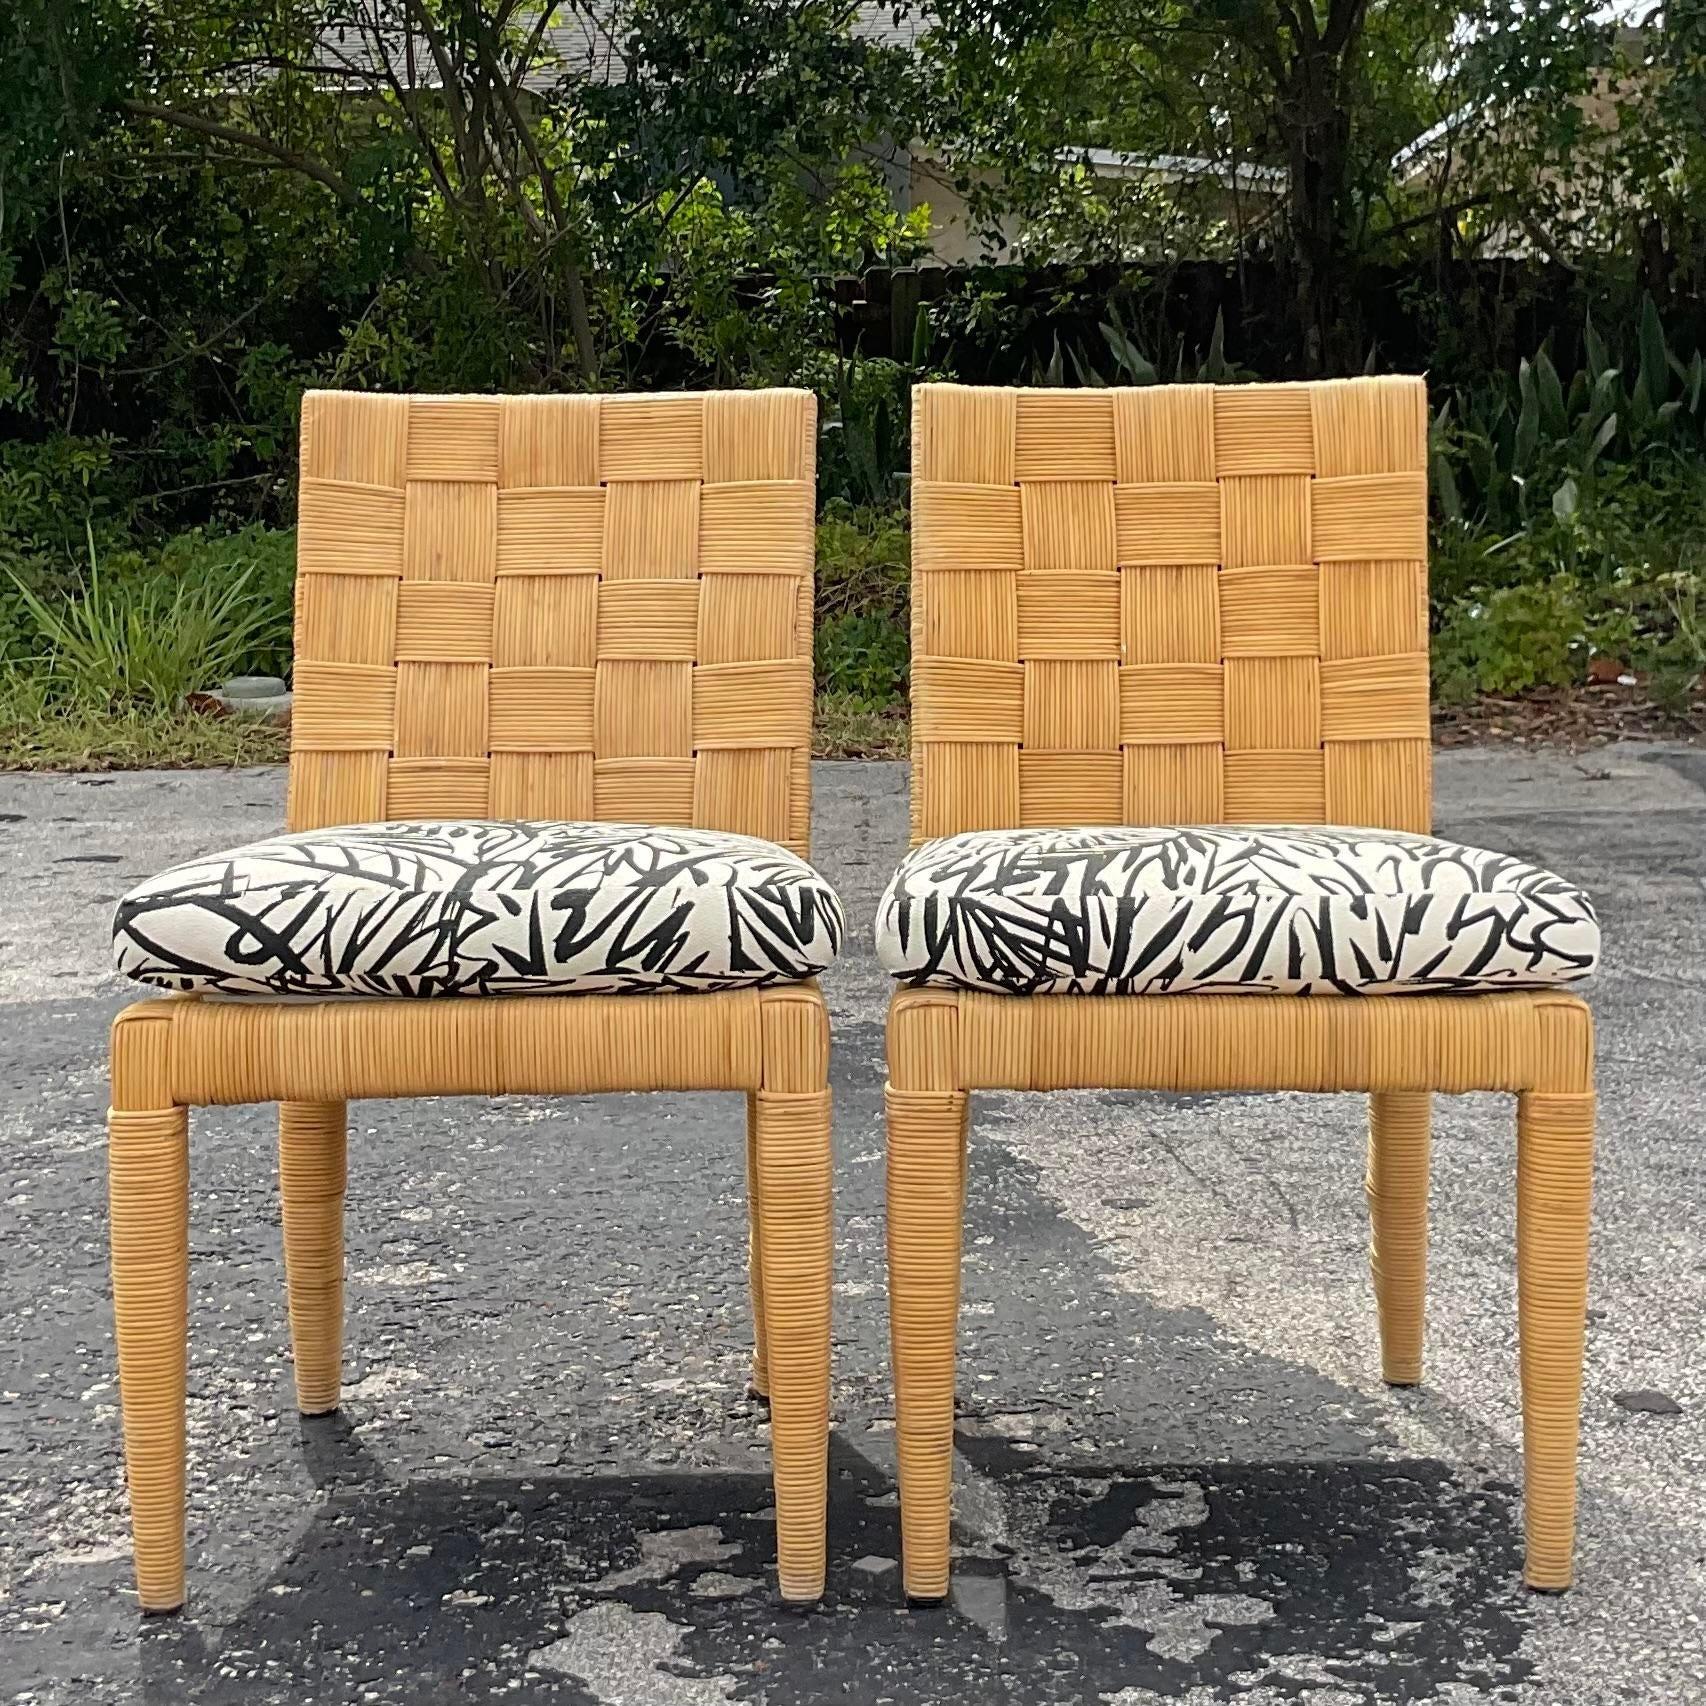 20th Century Vintage Coastal Donghia Block Island Dining Chairs - a Pair For Sale